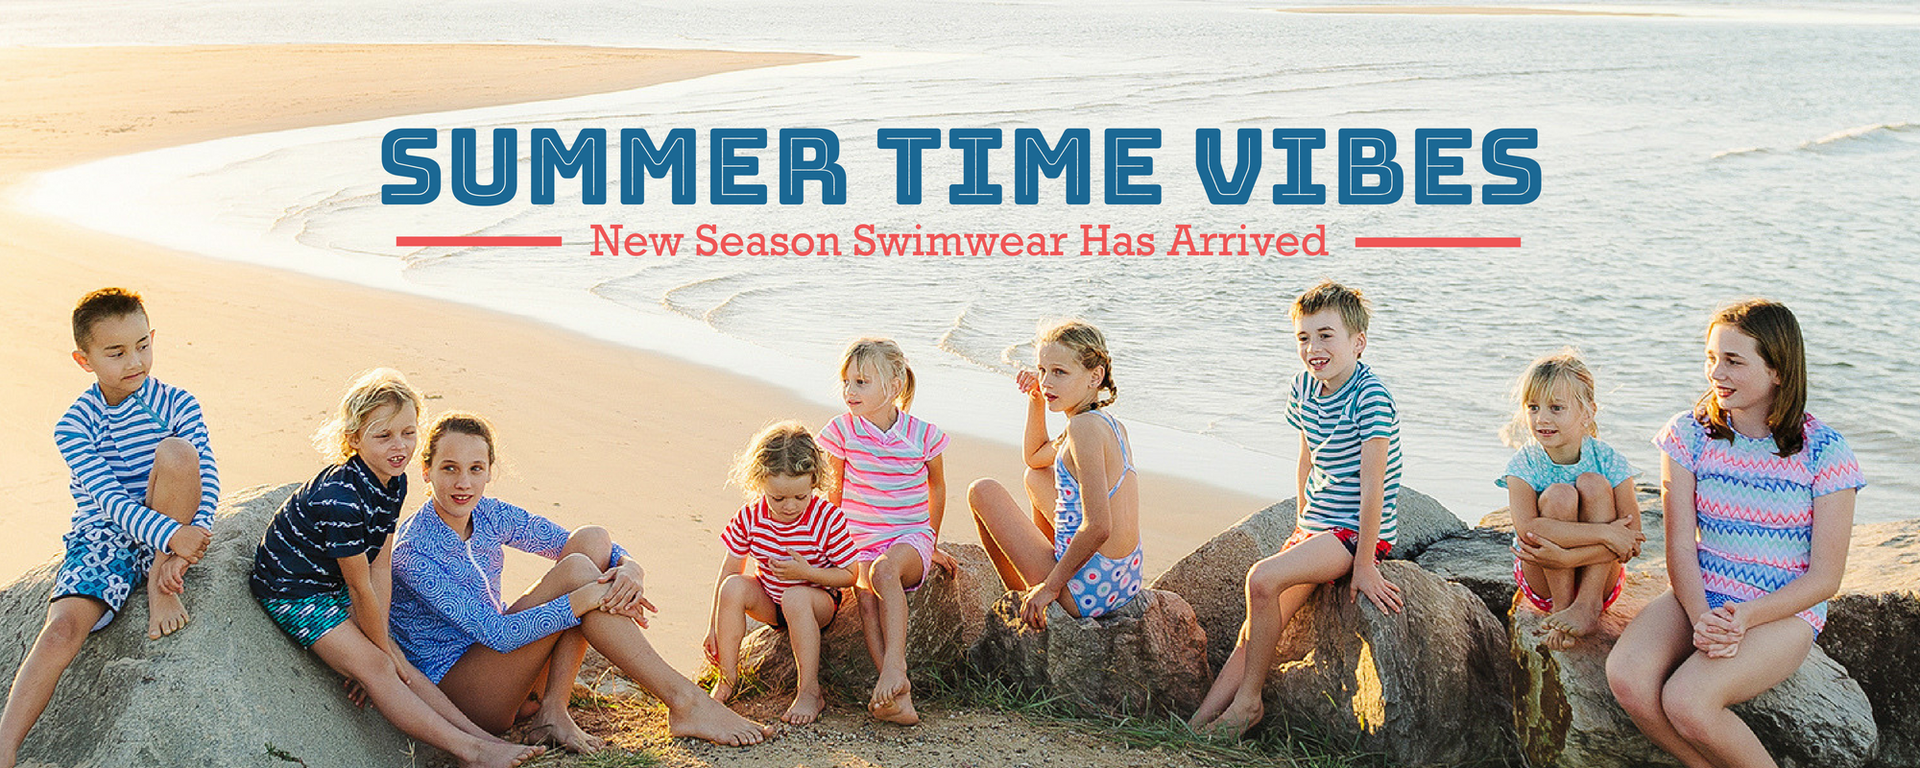 Something For Everyone in Our New Season Swimwear Release